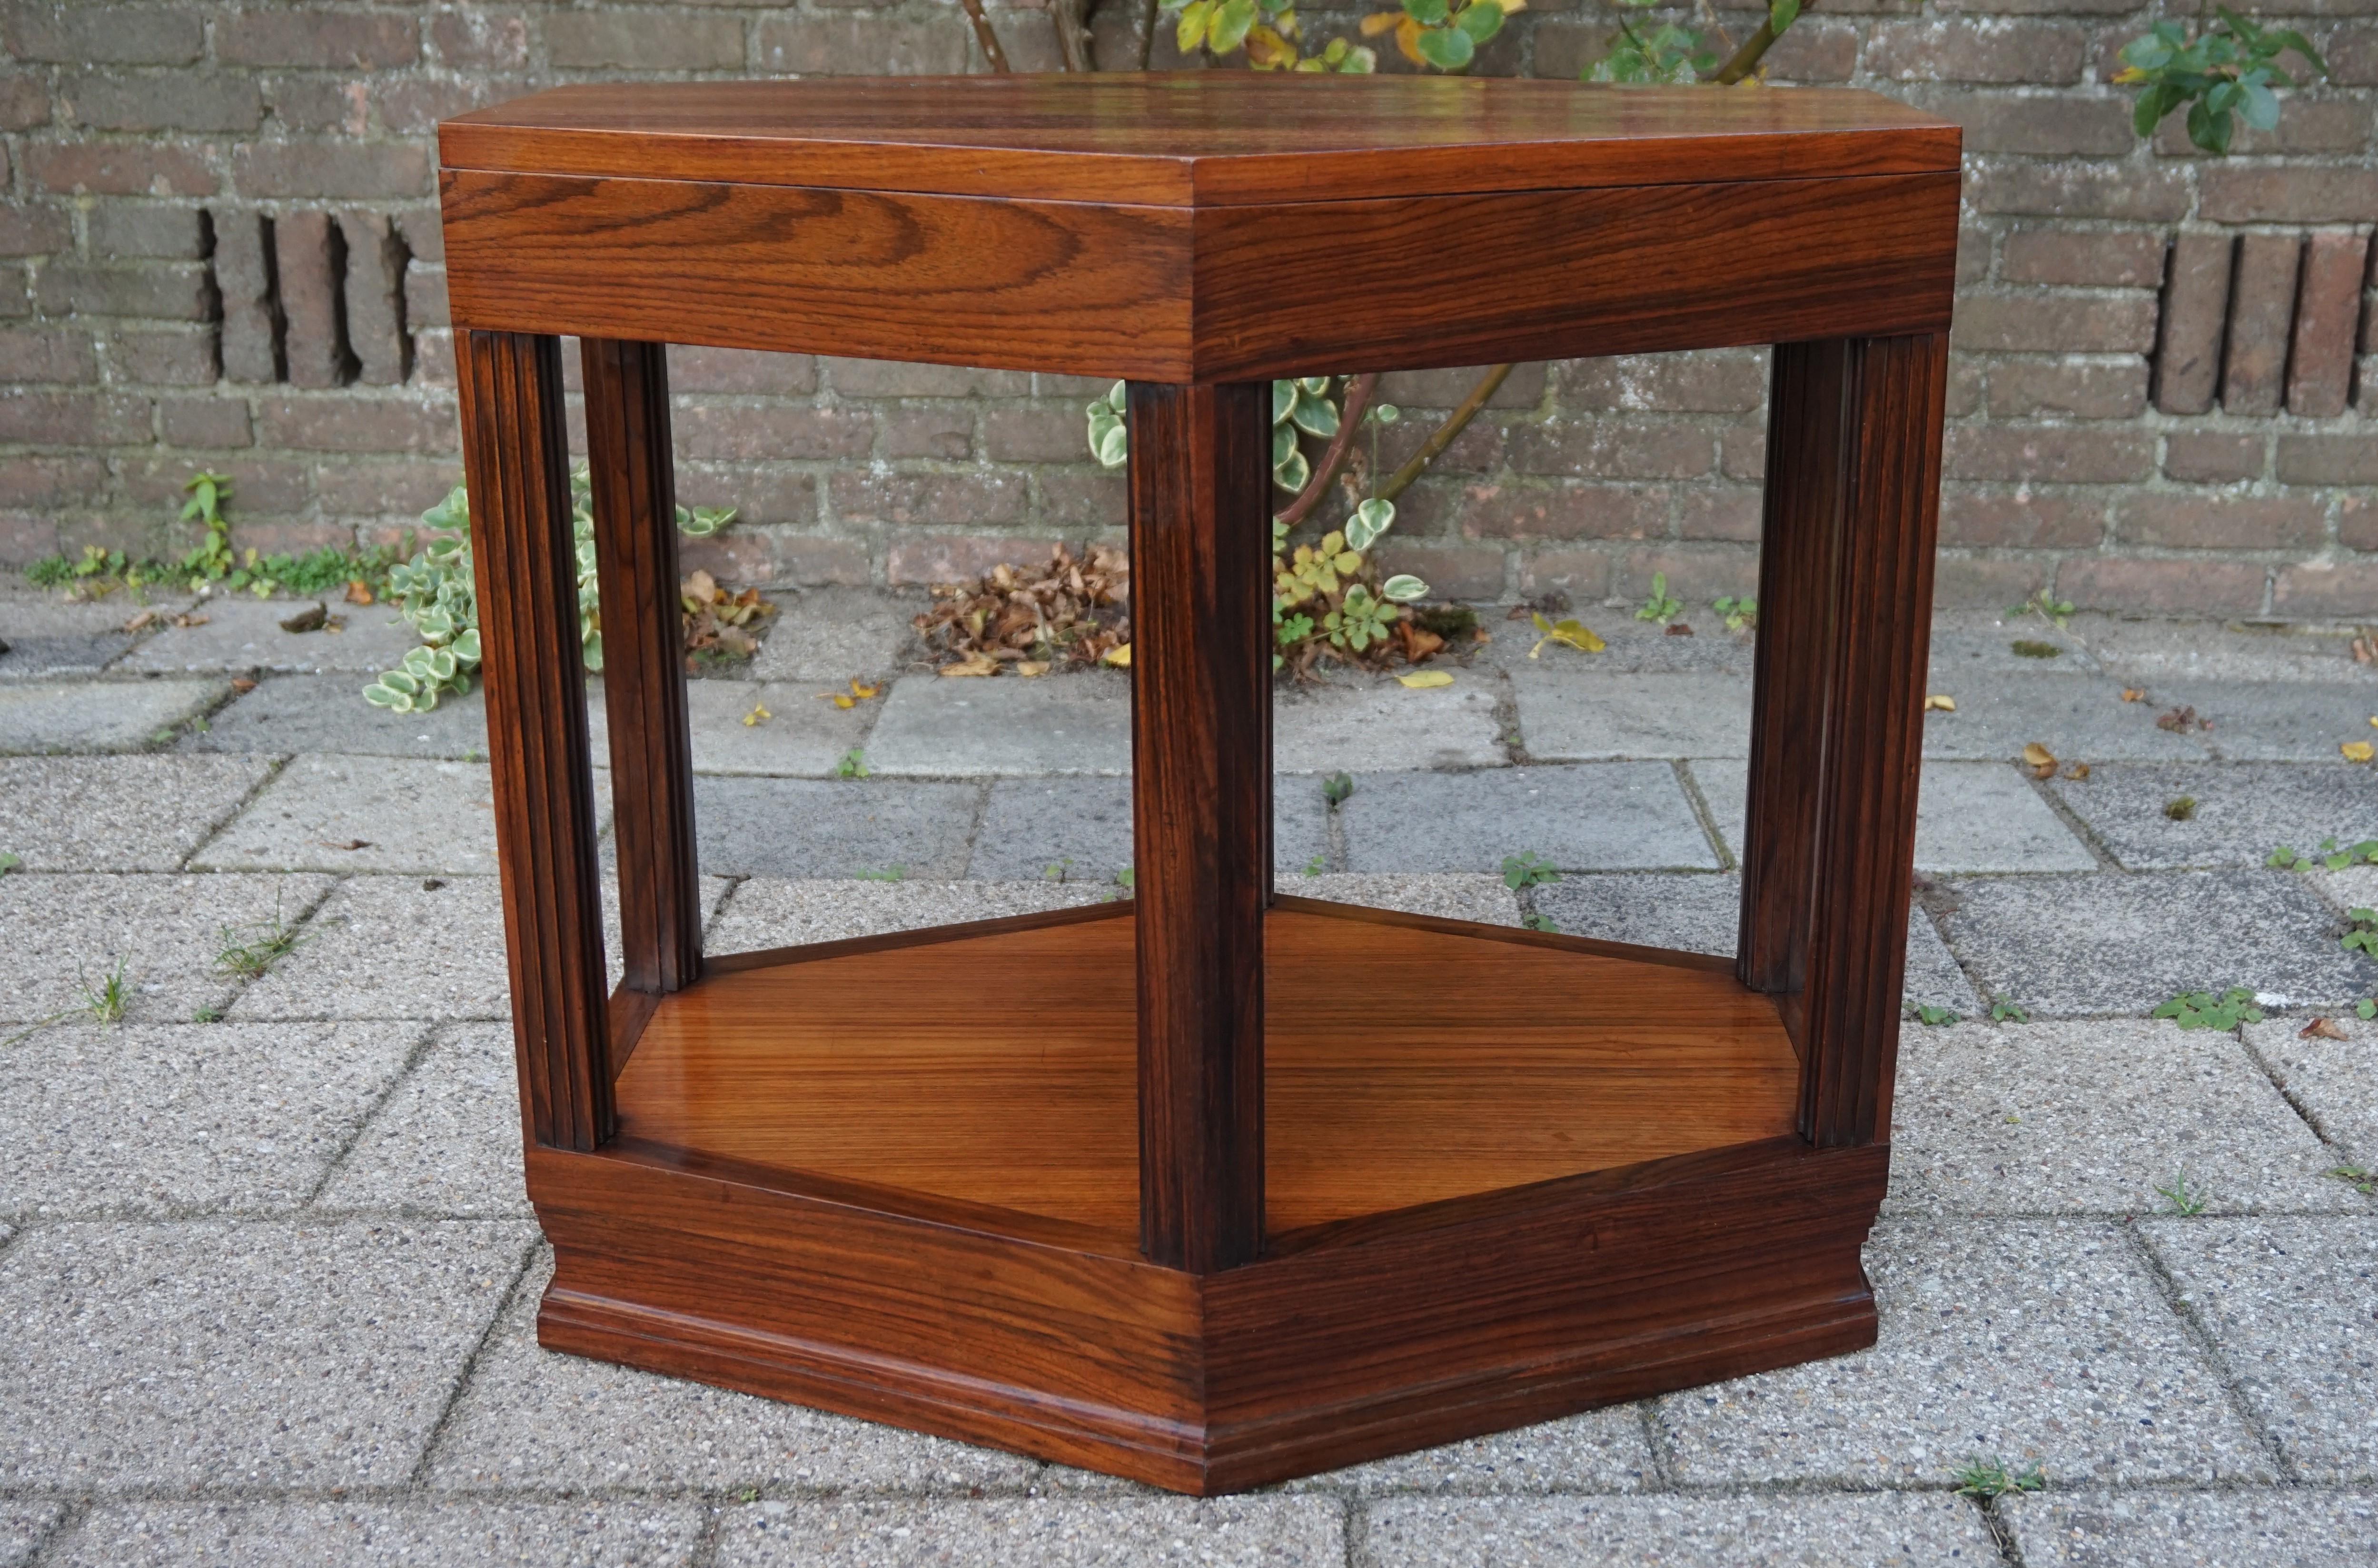 Hardwood Stunning and Excellent Condition Coromandel Art Deco Coffee or Sofa Table 1920 For Sale